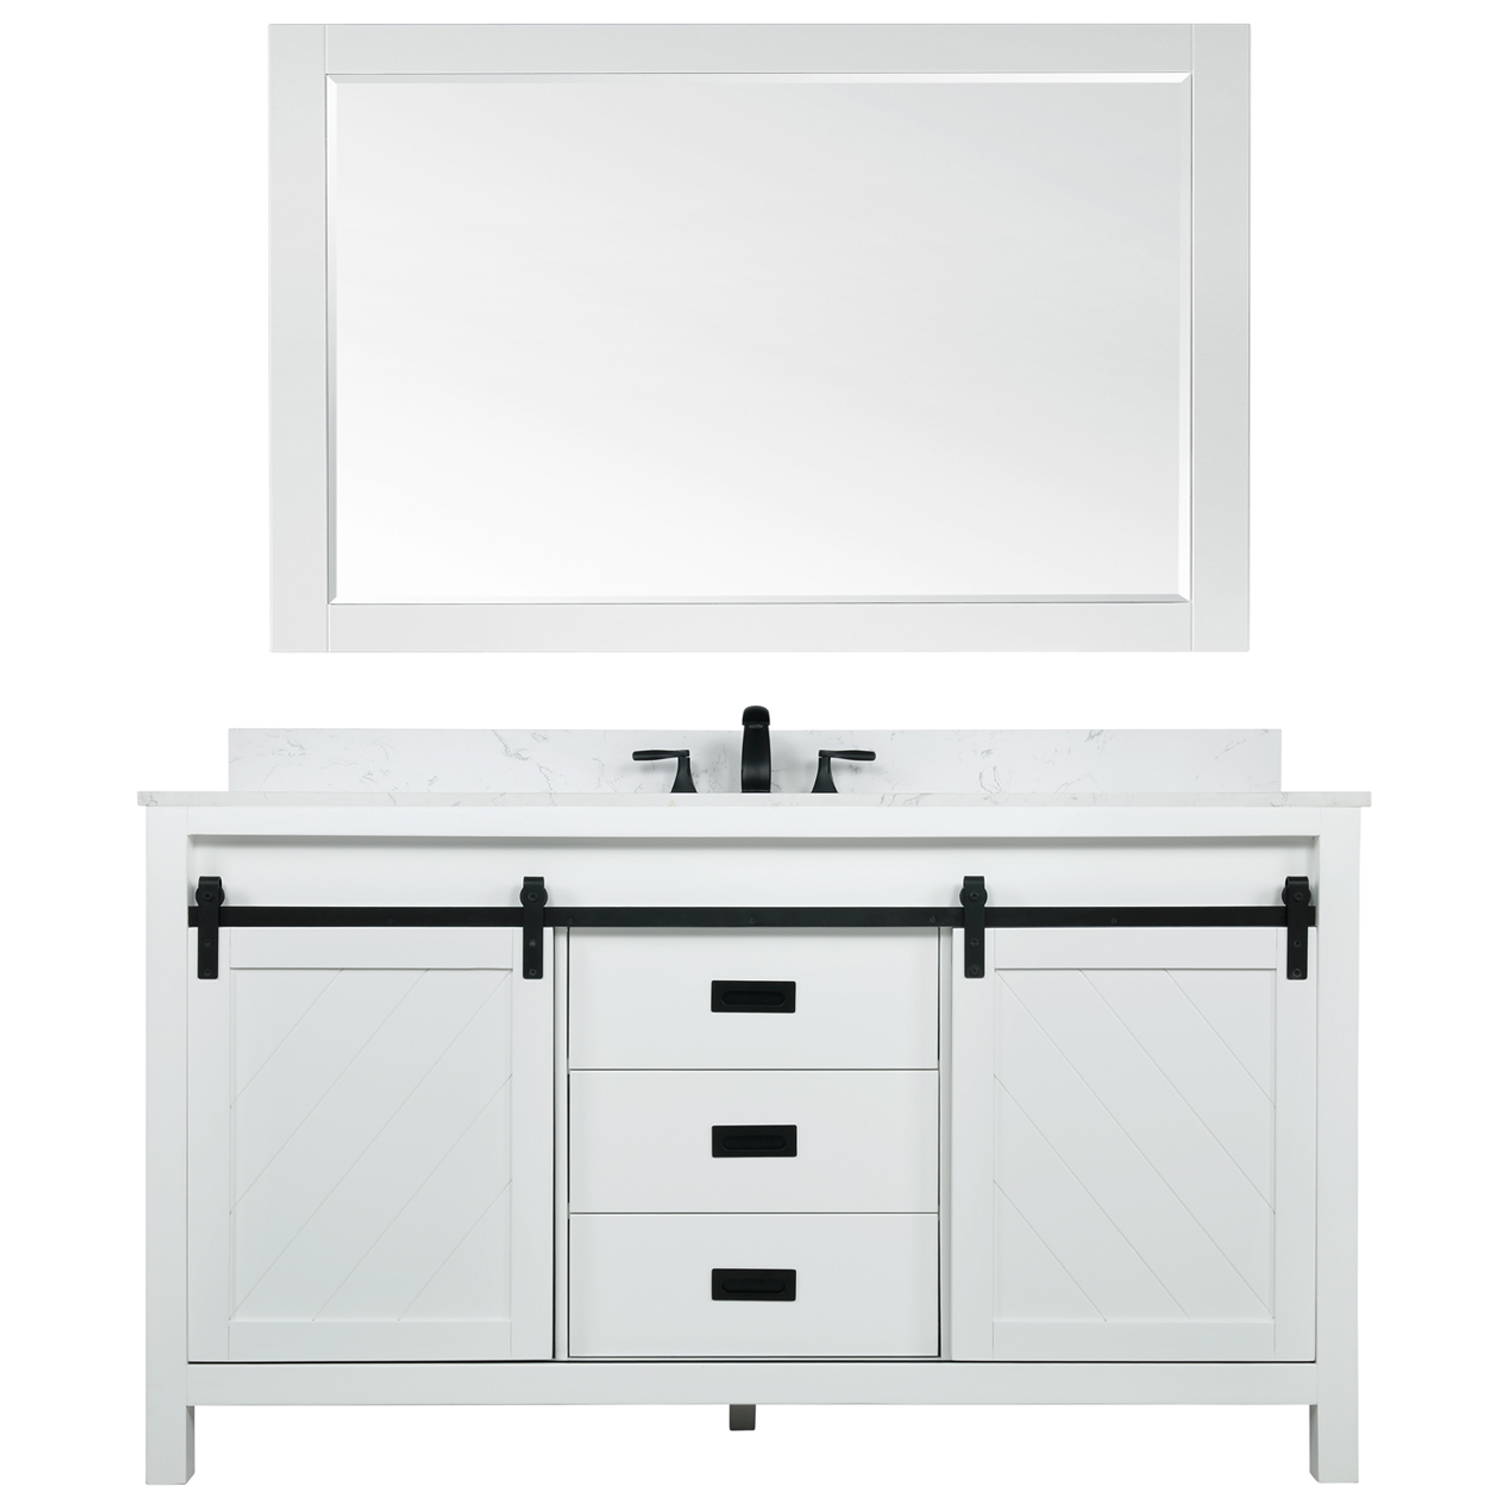 Issac Edwards Collection 36" Single Bathroom Vanity Set in Jewelry Blue and Composite Carrara White Stone Top with White Farmhouse Basin without Mirror